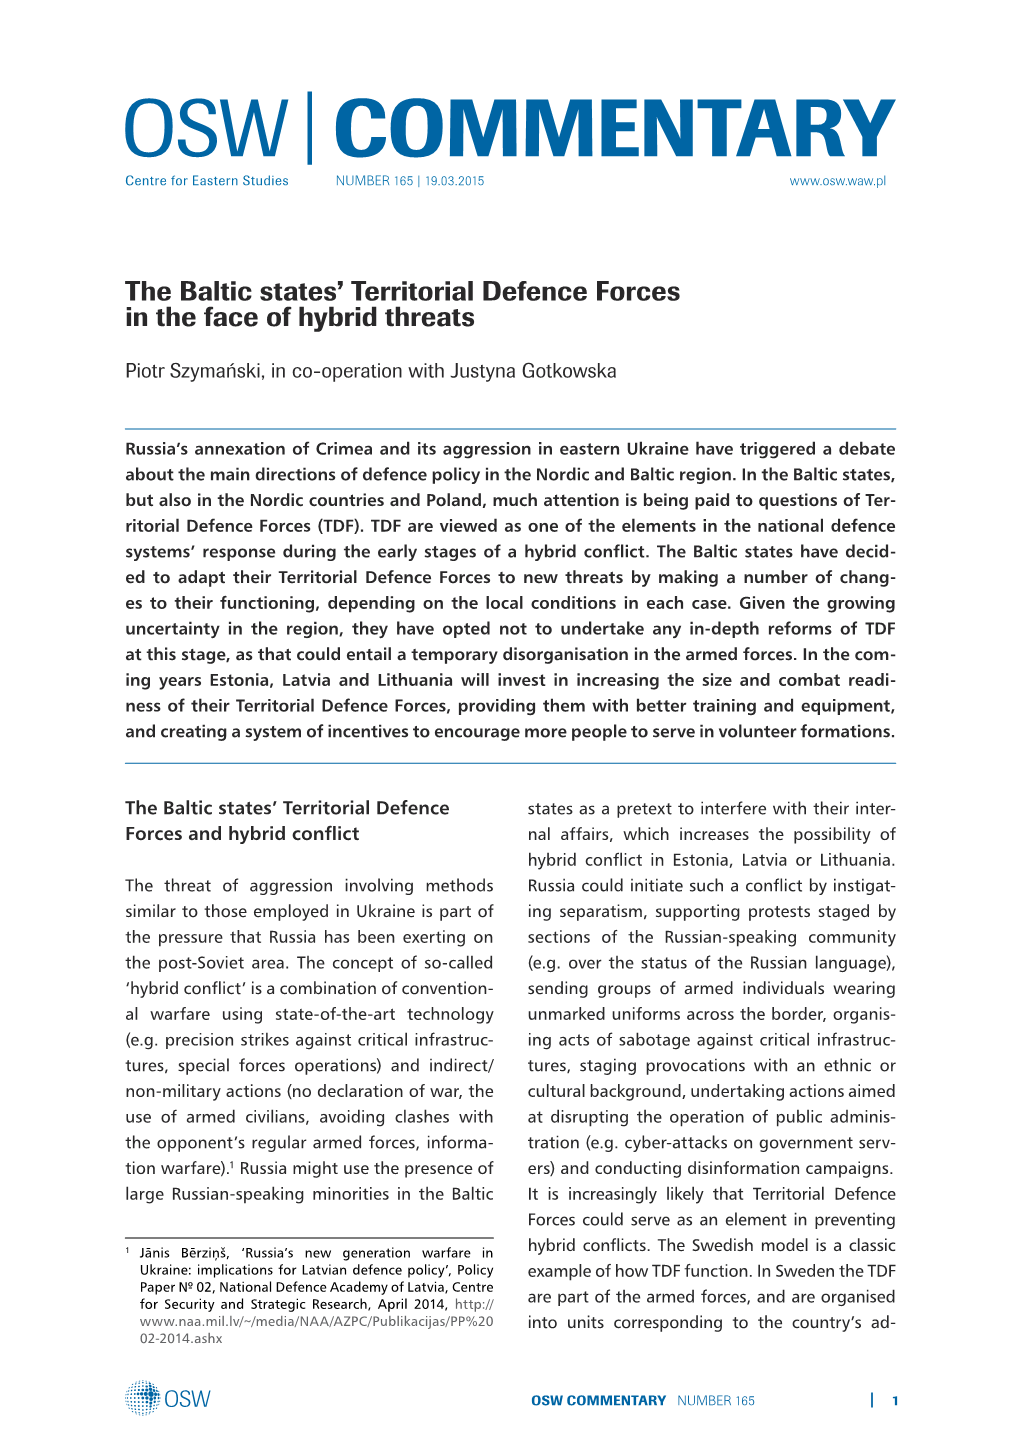 The Baltic States' Territorial Defence Forces in the Face of Hybrid Threats